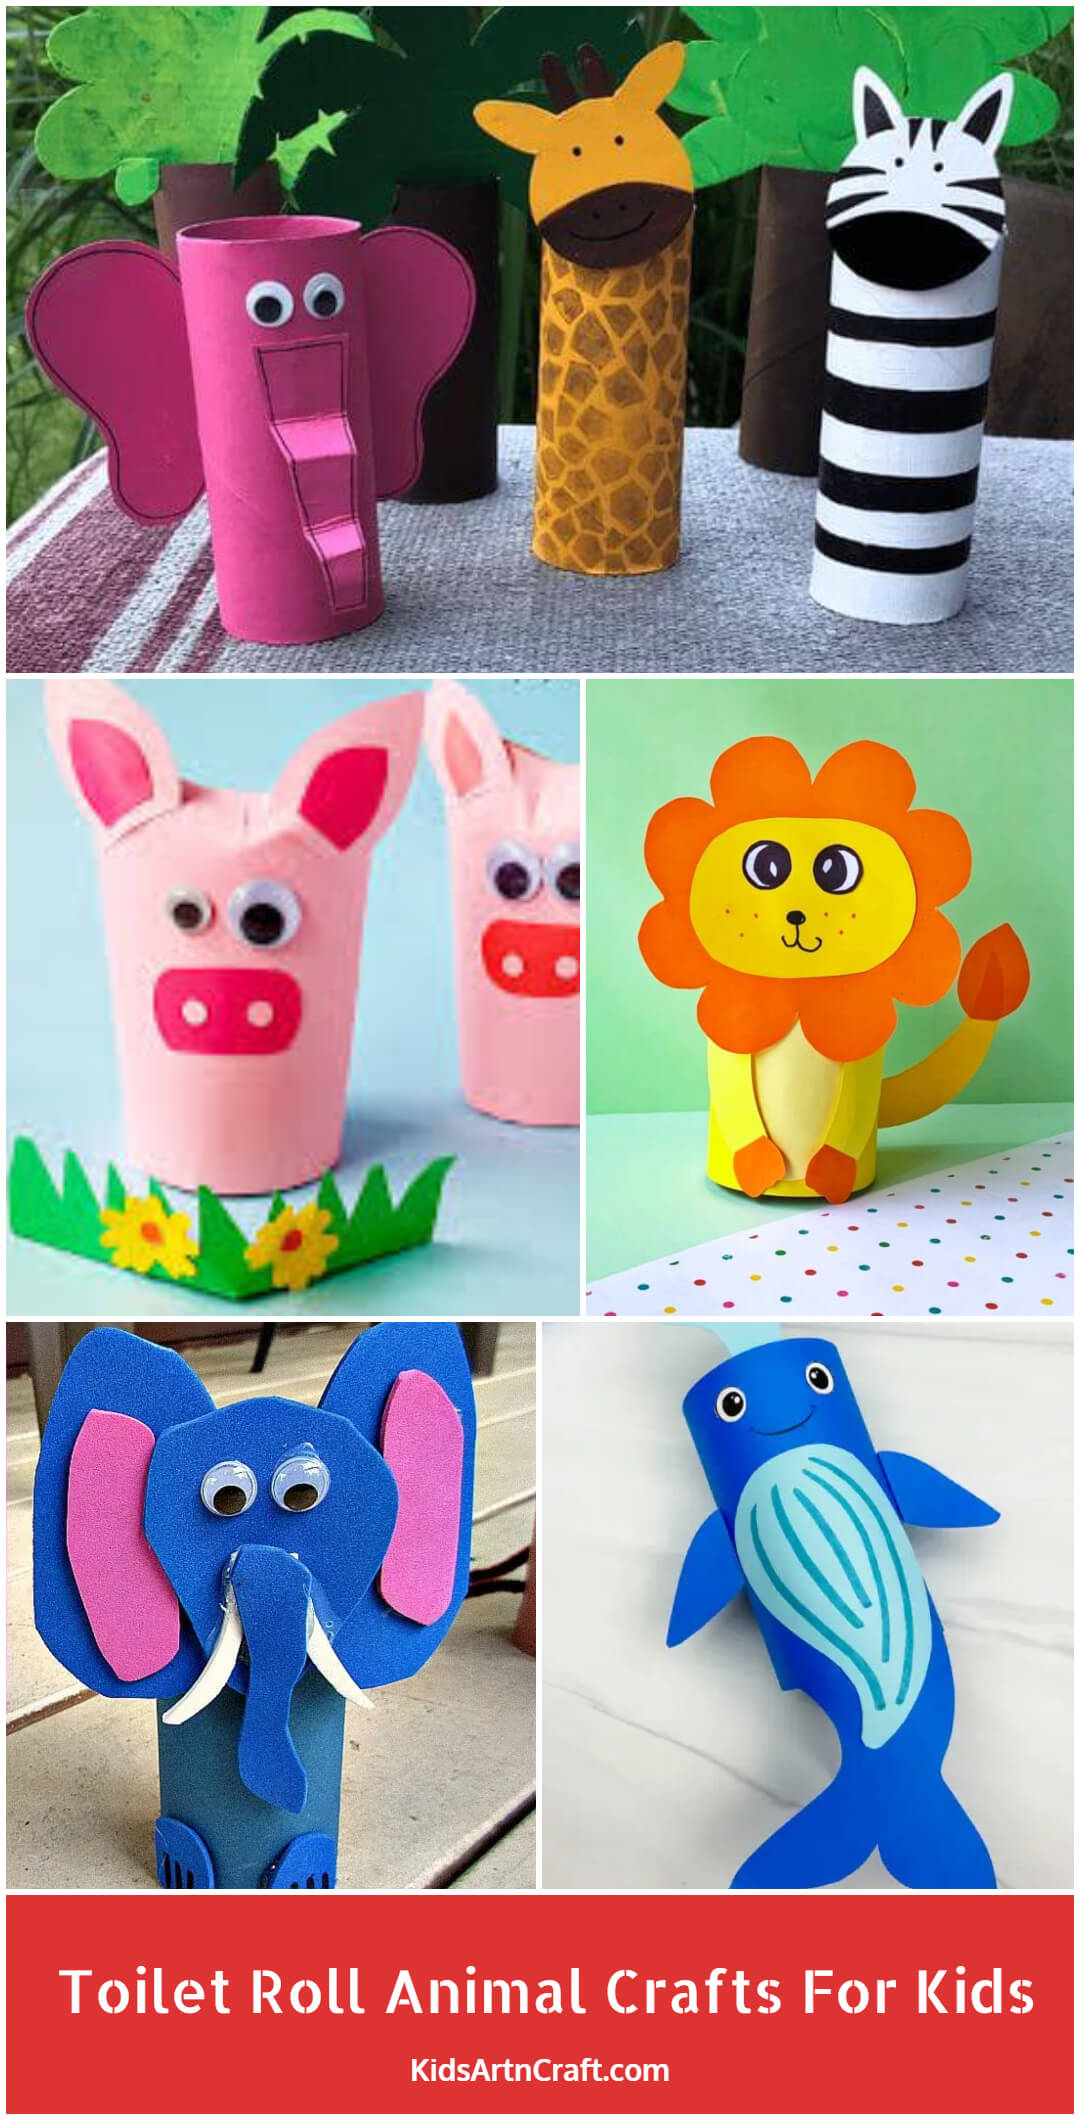 Toilet Roll Animal Crafts for Kids